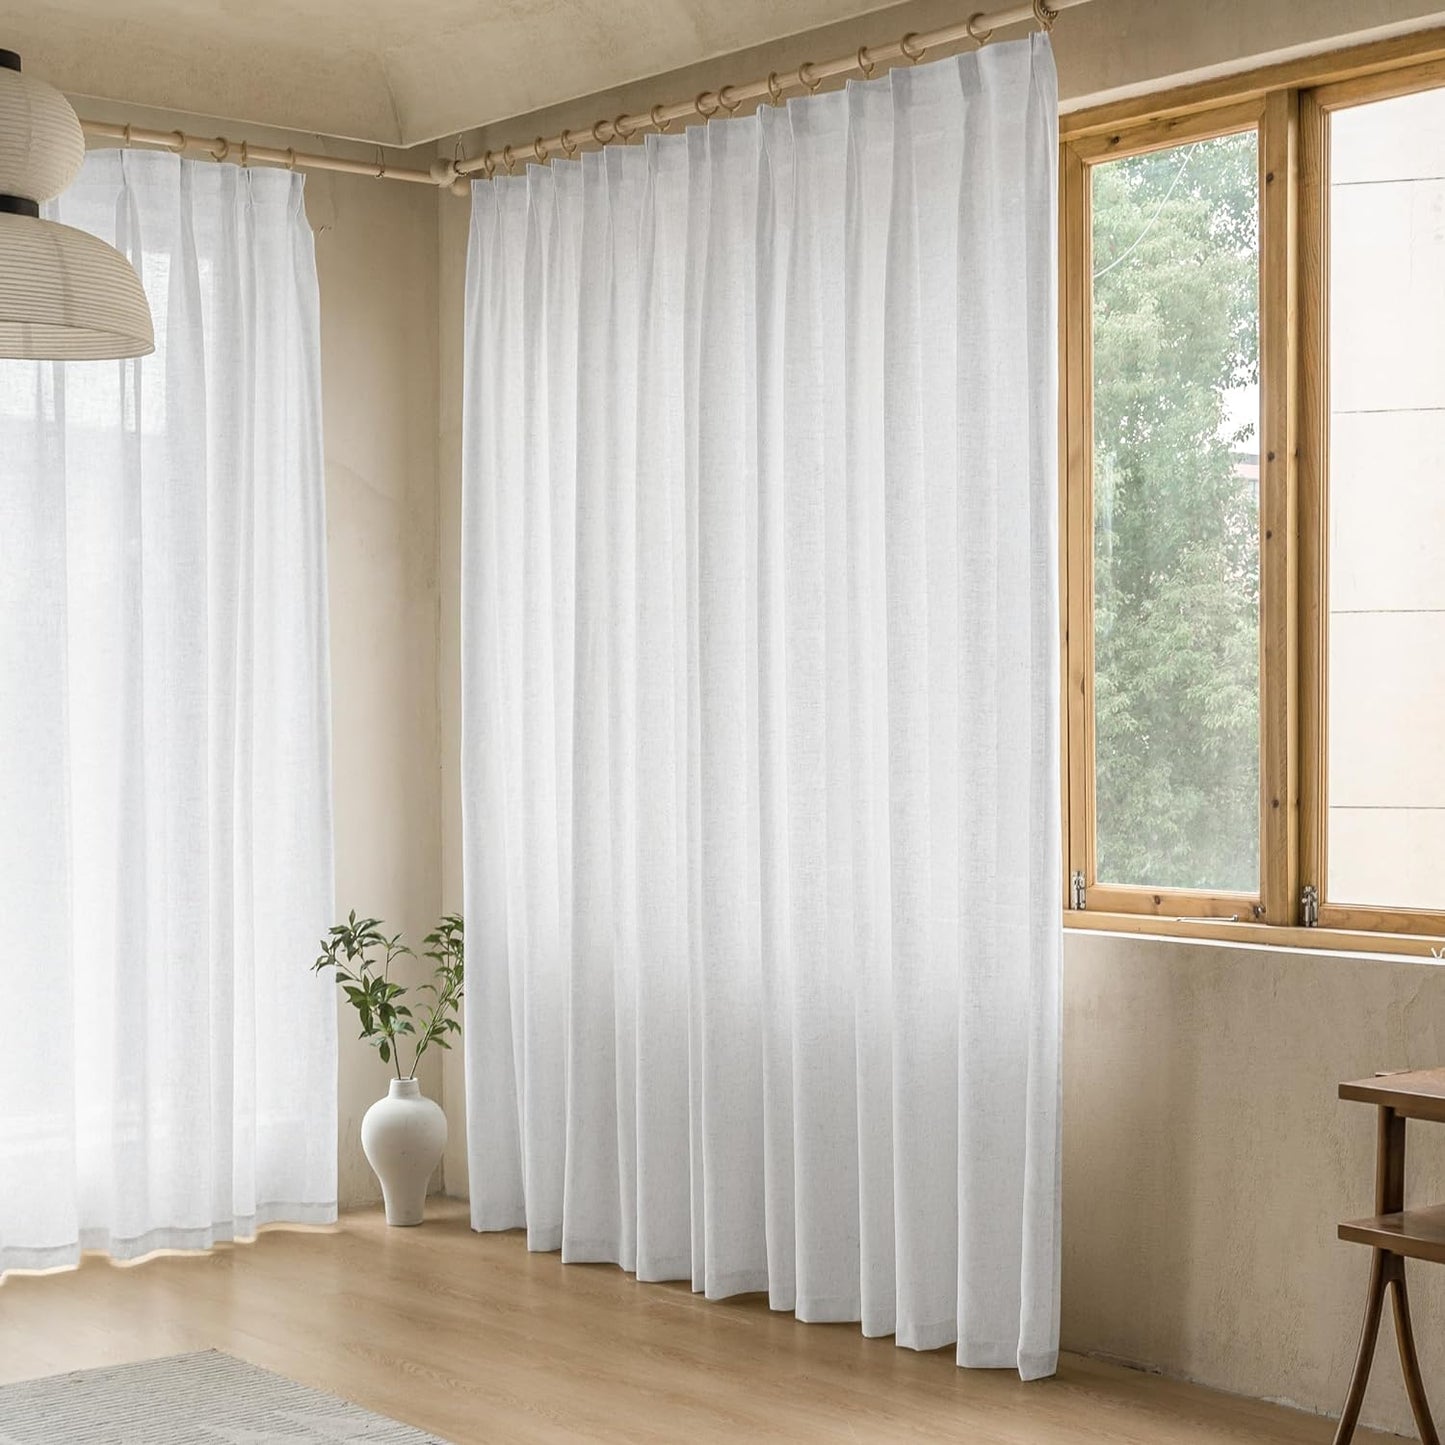 MAIHER Extra Wide Pinch Pleated Drapes 108 Inches Long, Faux Linen Light Filtering Semi Sheer Curtains with Hooks for Living Room Bedroom, Natural Linen (1 Panel, 100 W X 108 L)  MAIHER Beige White 54X120 